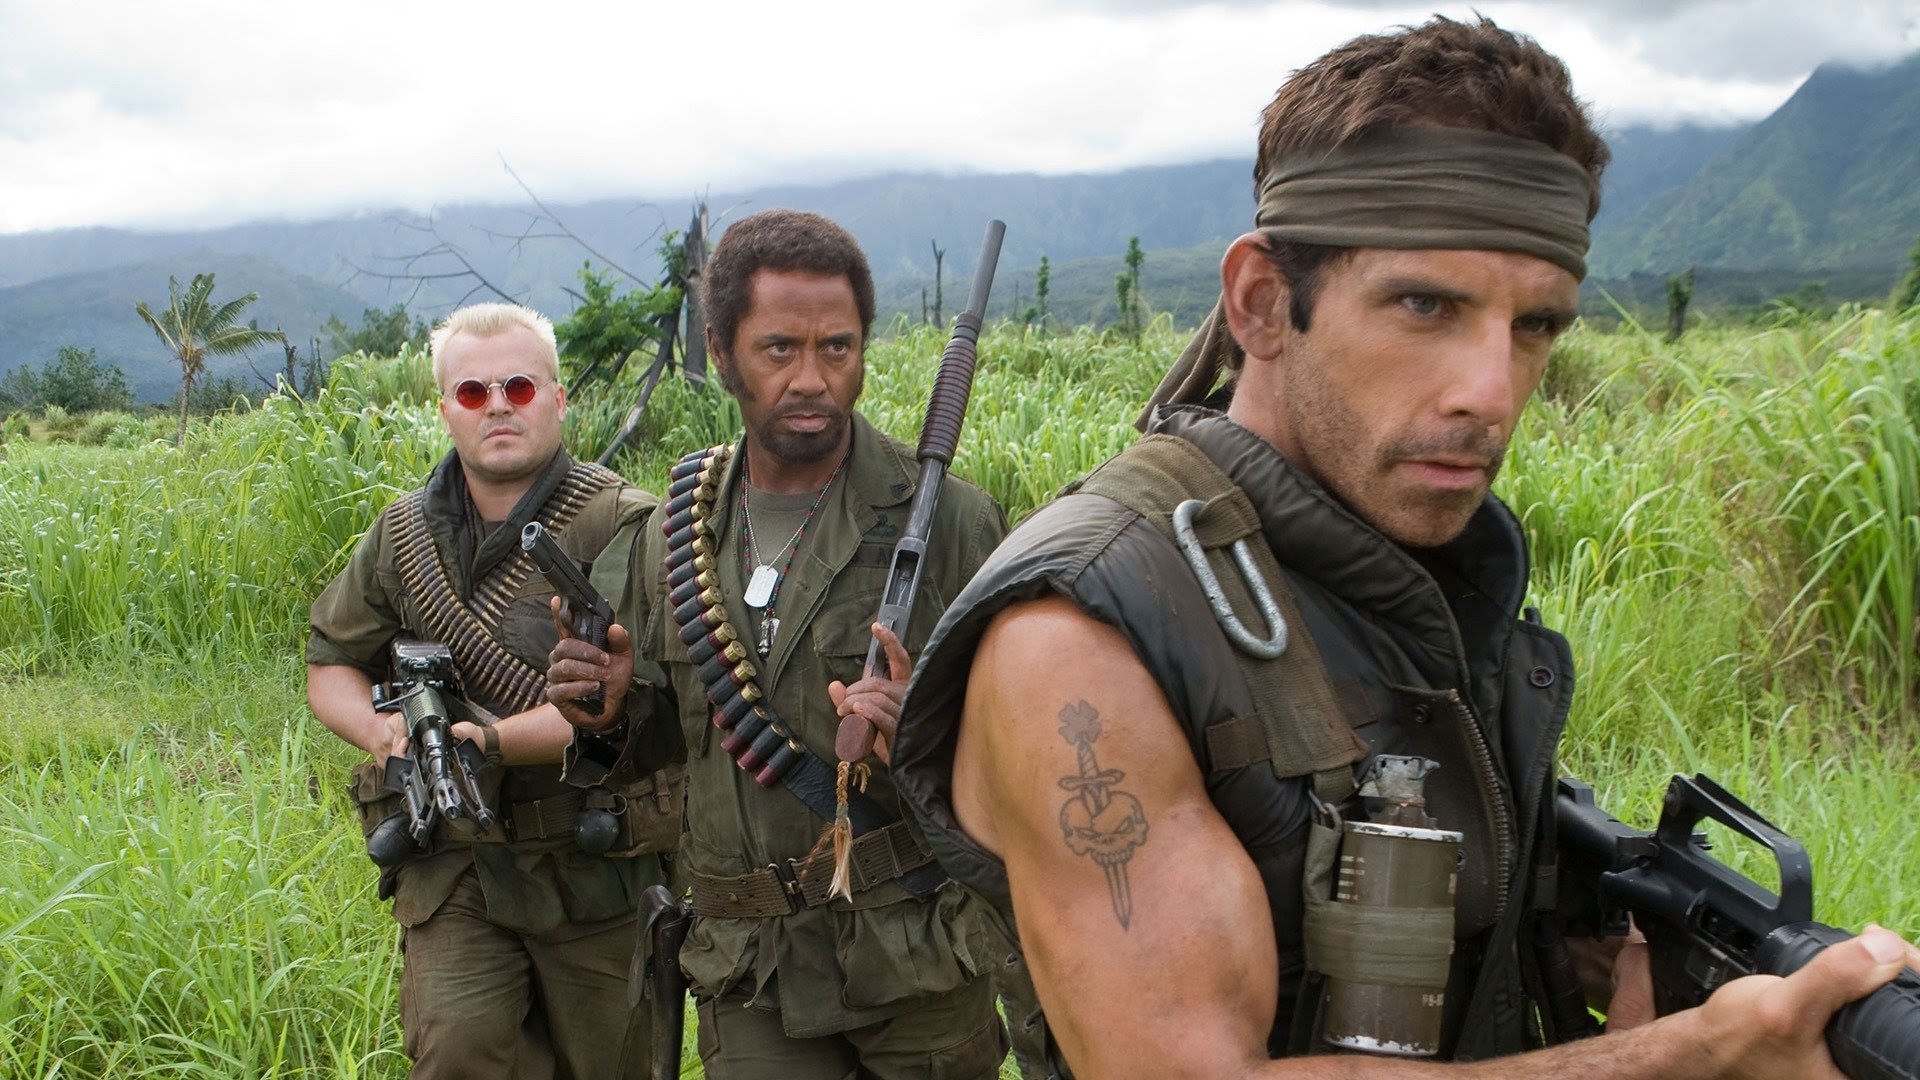 Tropic Thunder also featured Ben Stiller and Jack Black in the lead.